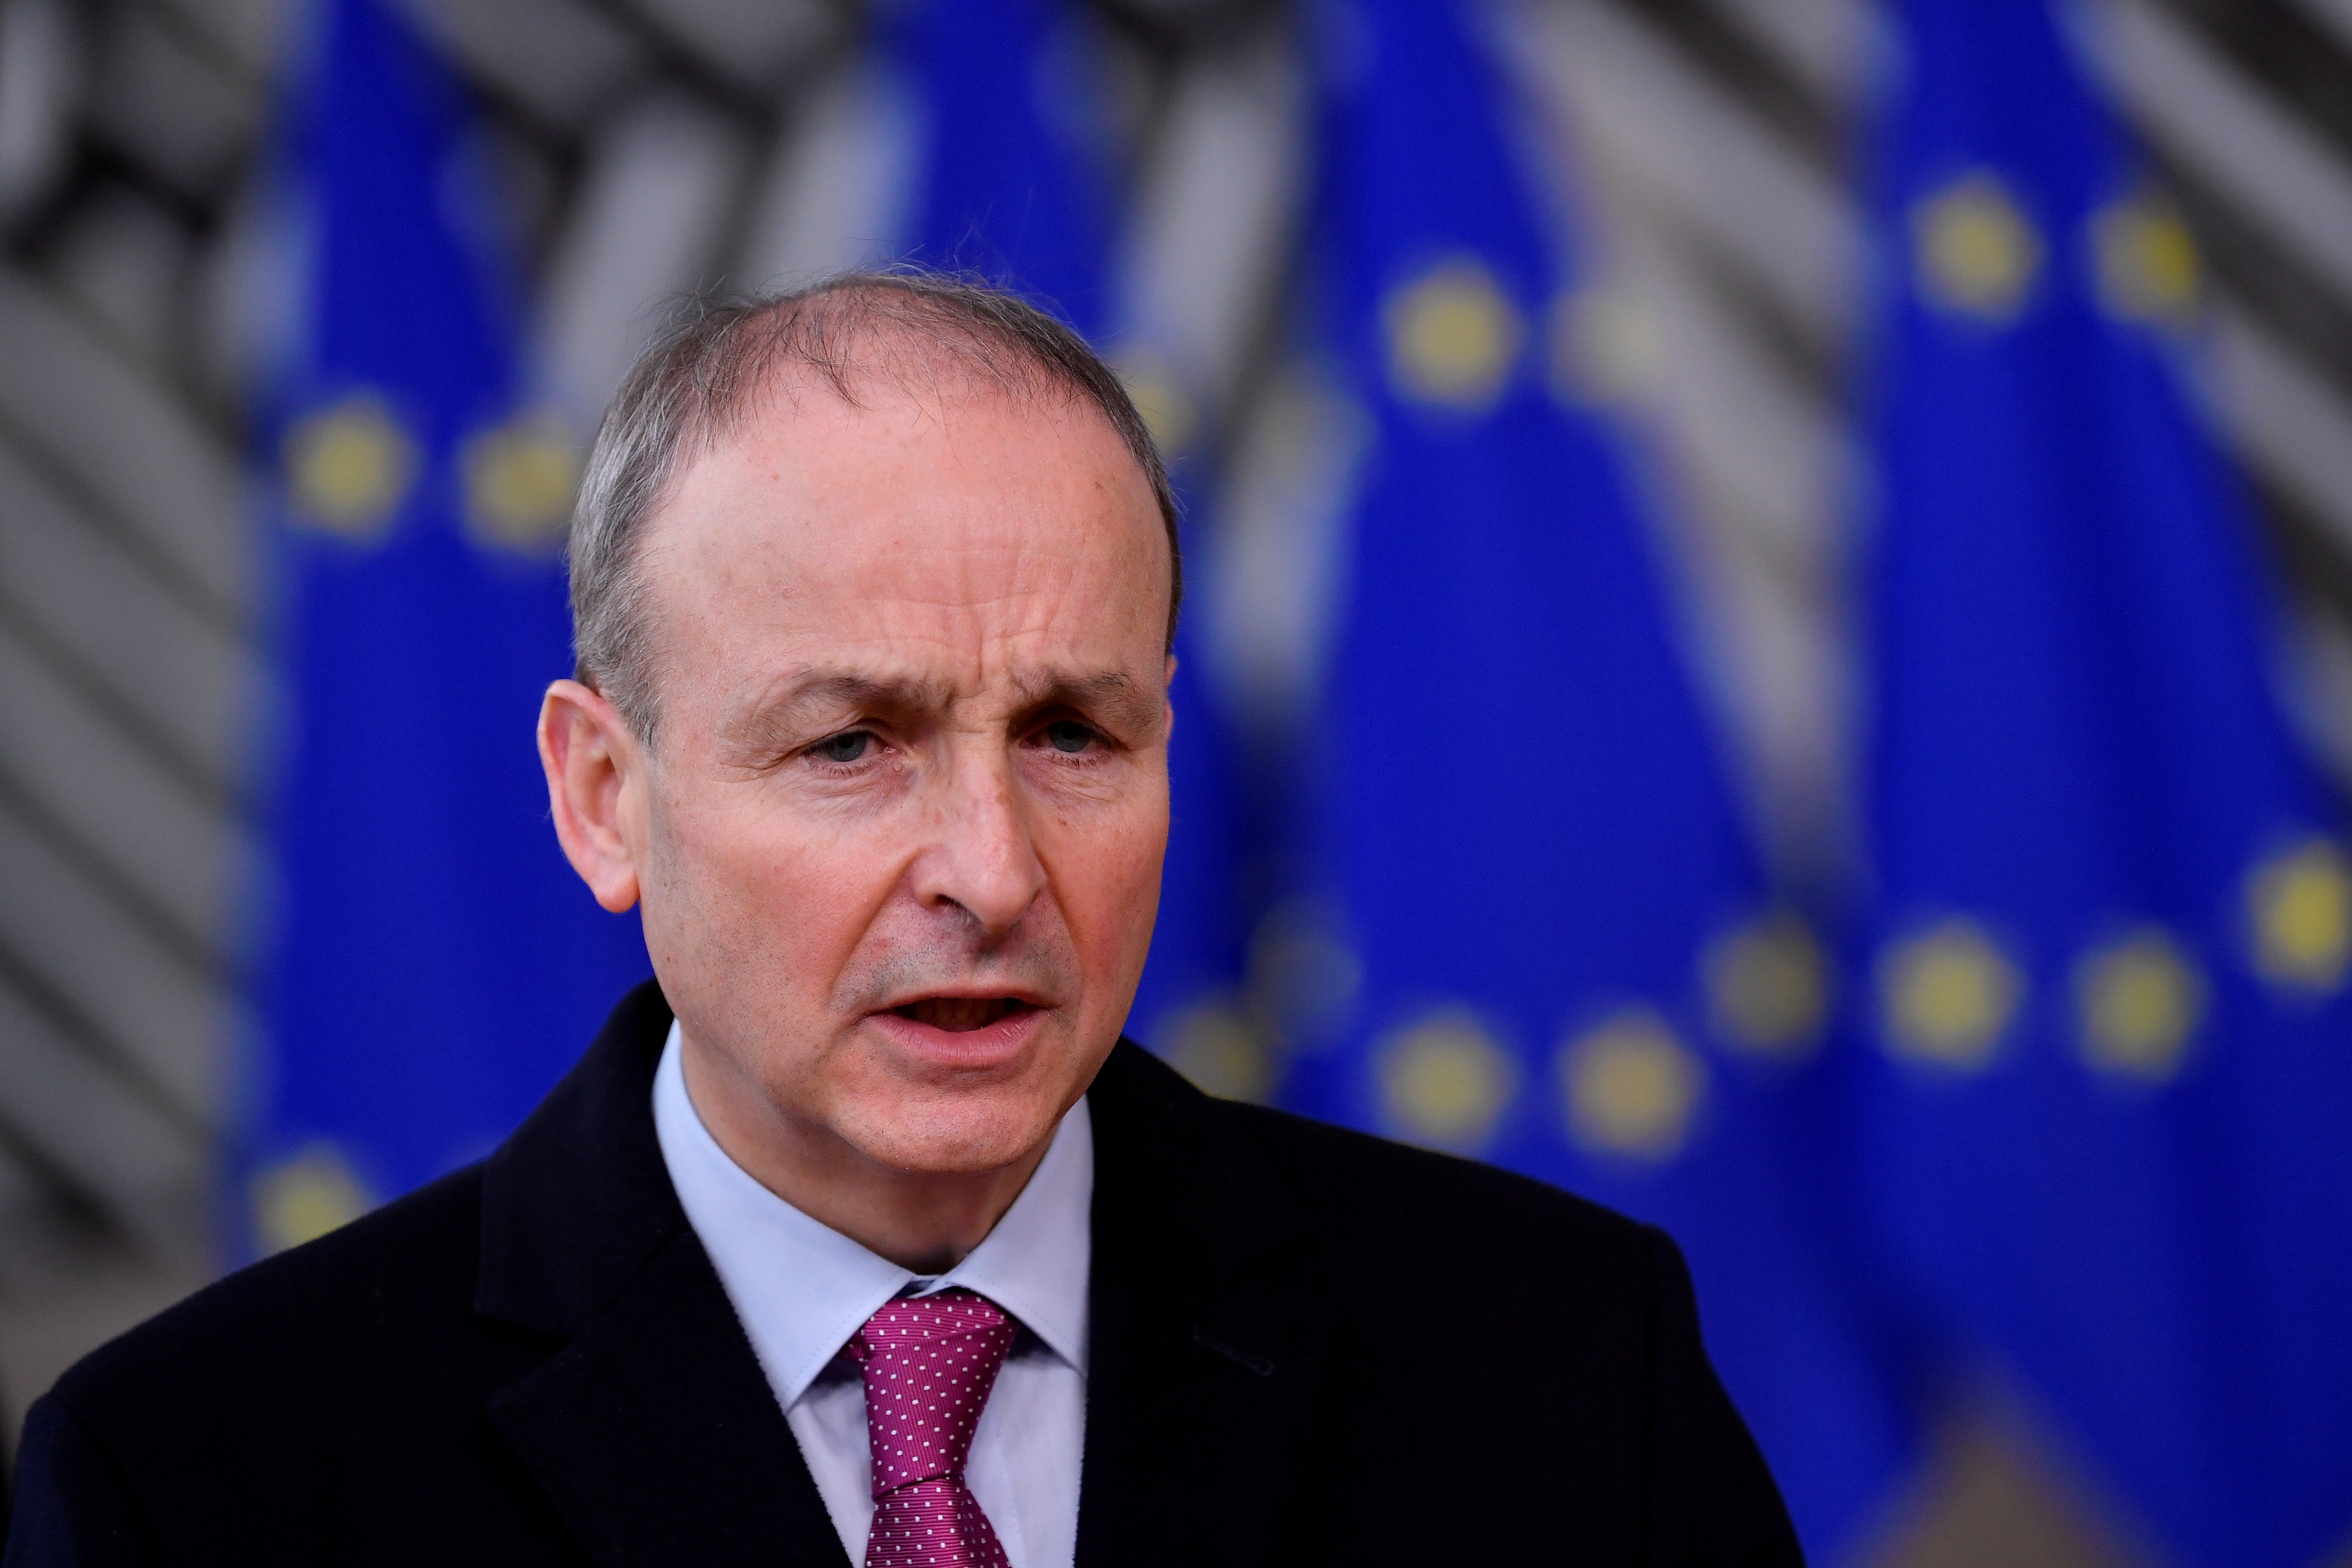 The Fianna Fail leader said politics must be put aside to find a practical resolution to any difficulties within the structure of the withdrawal agreement